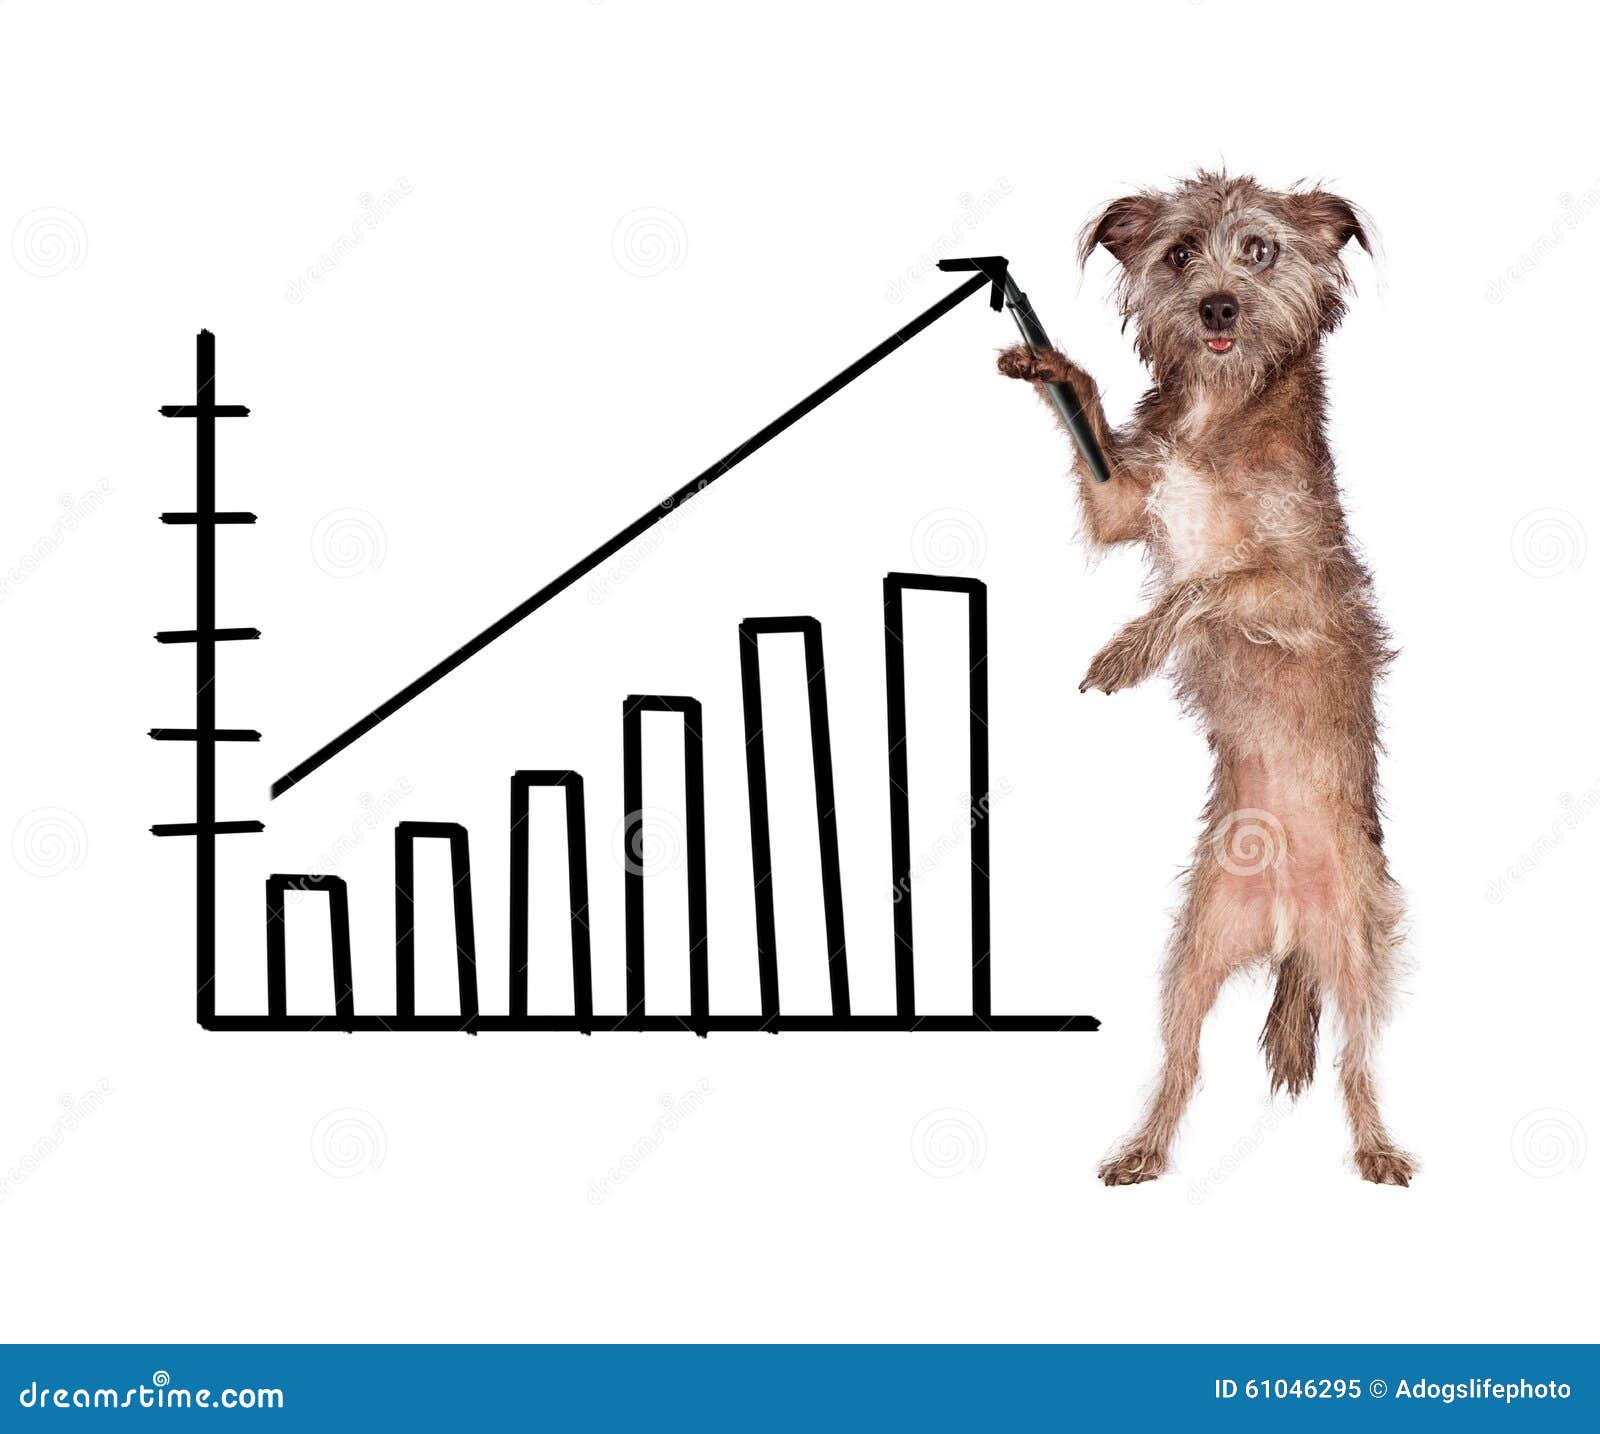 Dog Drawing Increasing Sales Chart Stock Image - Image of breed, indoors:  61046295